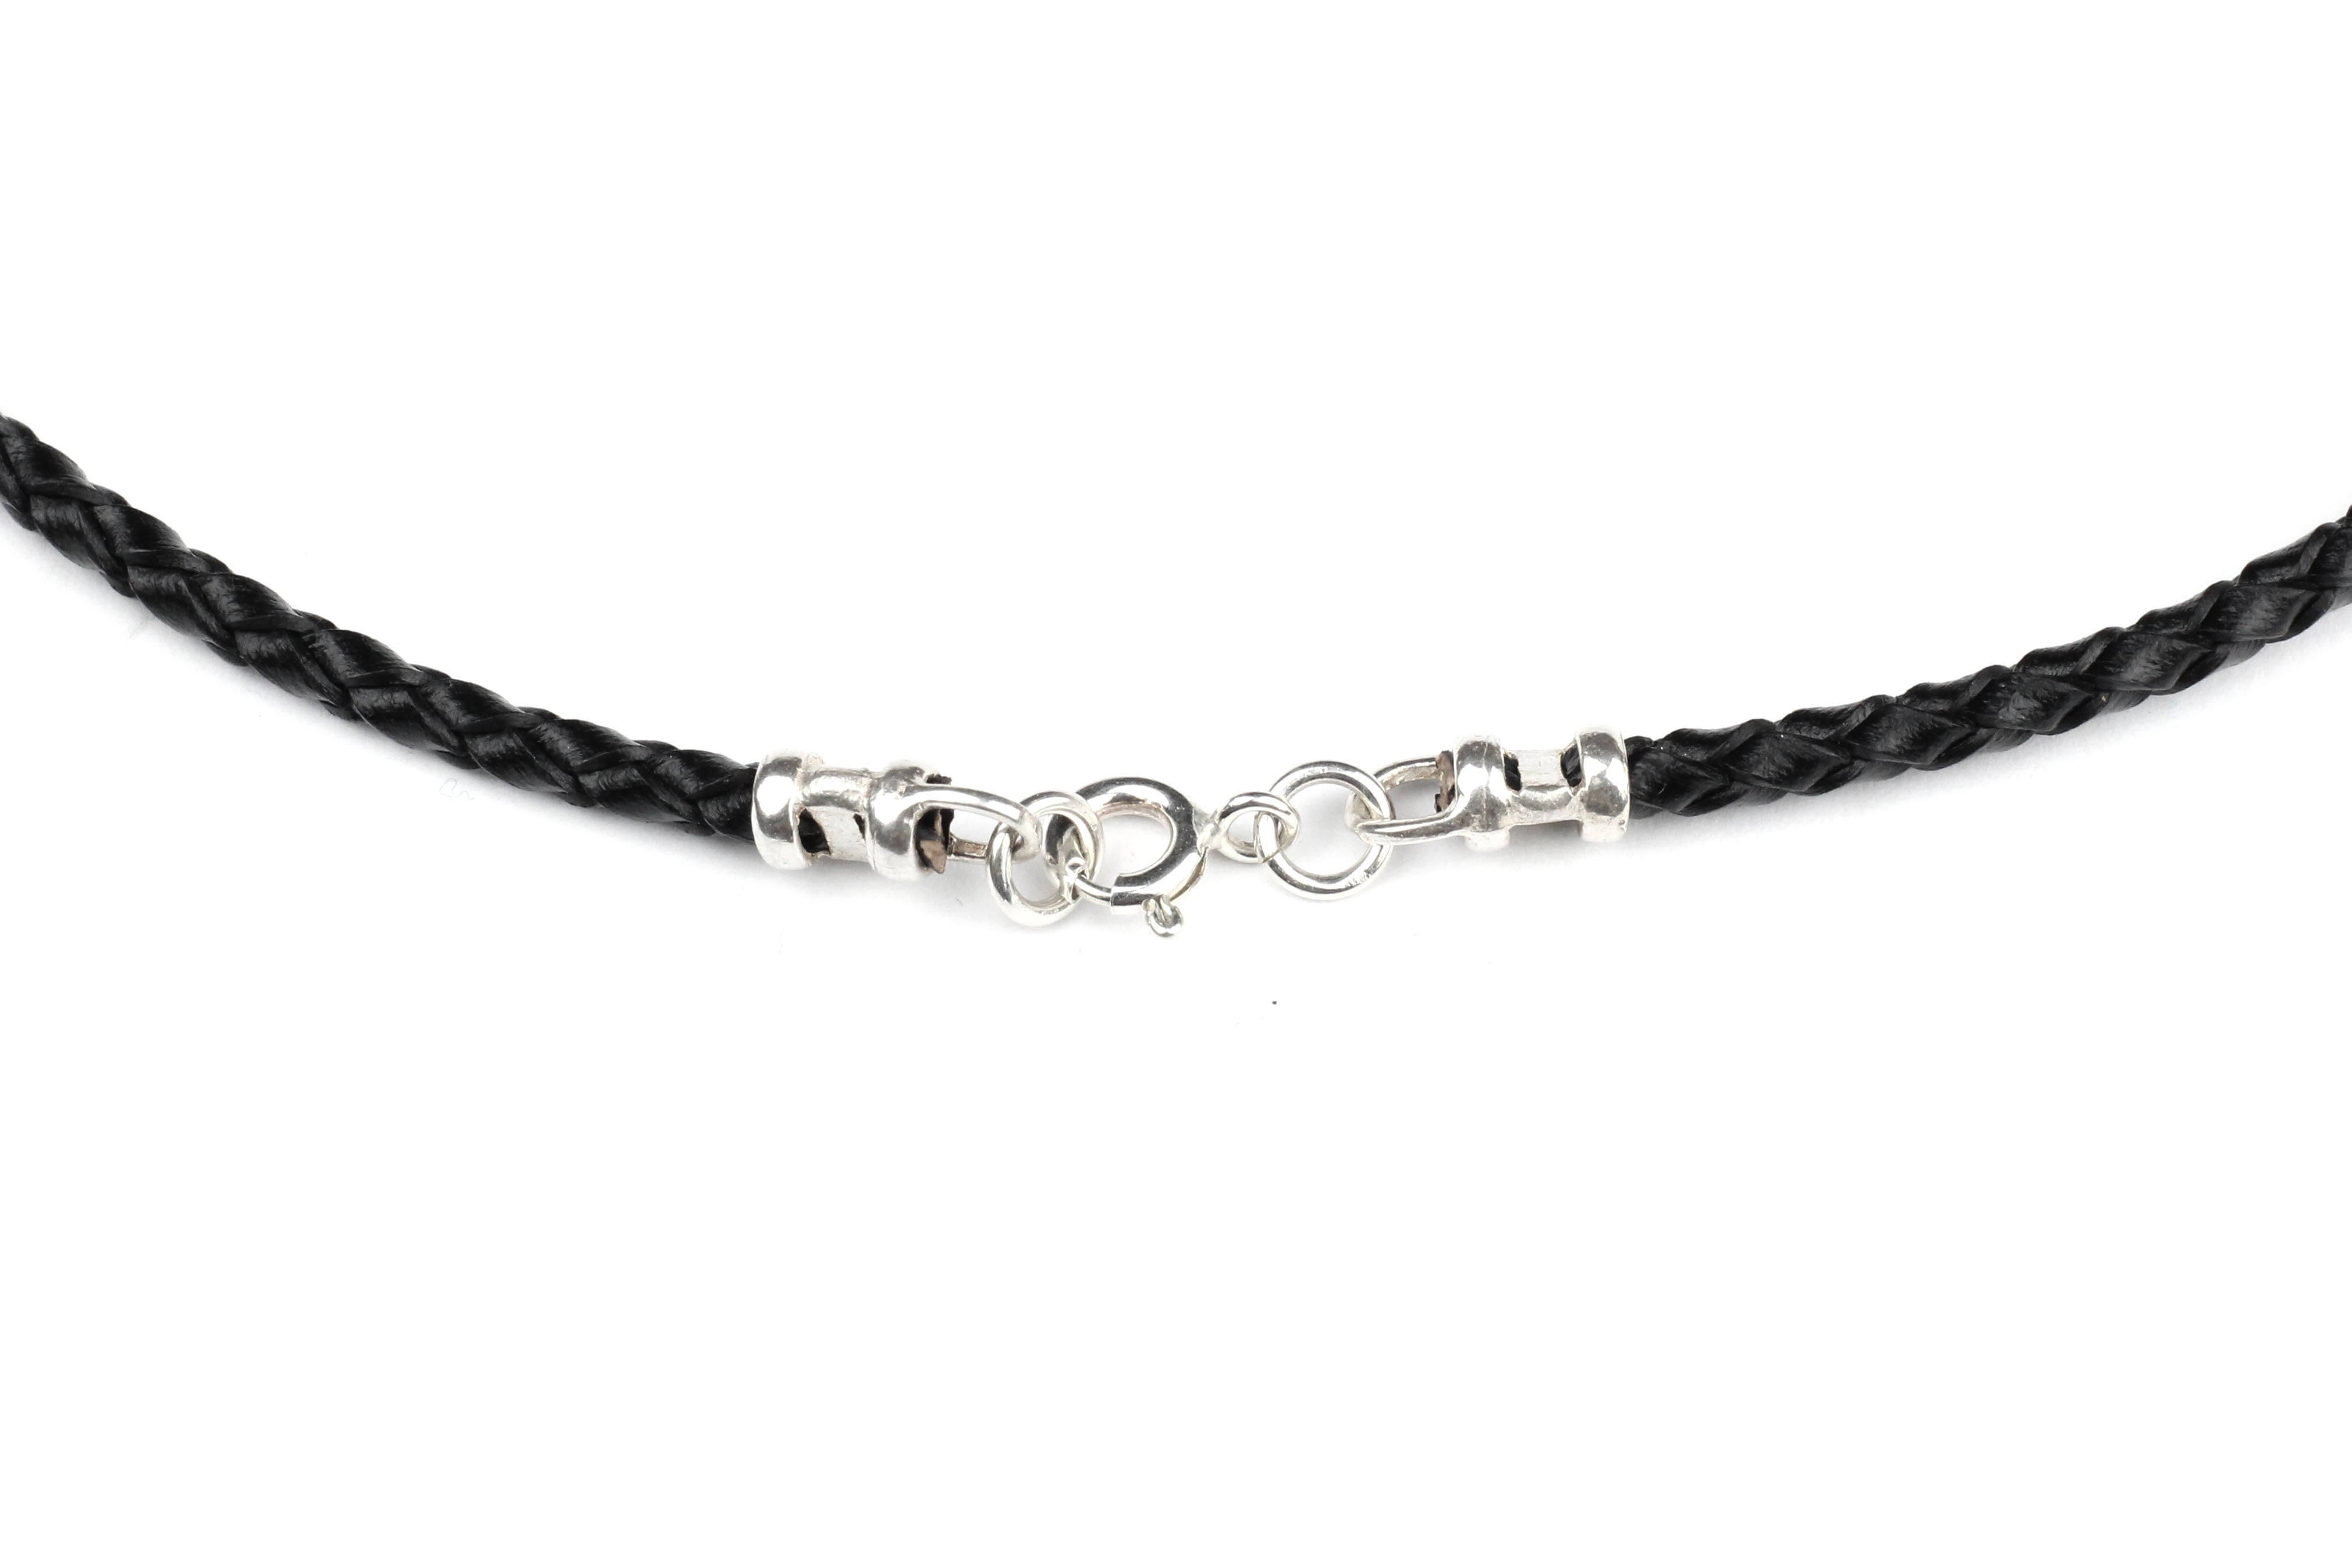 18 Black Leather Cord Necklace - 10 Pack